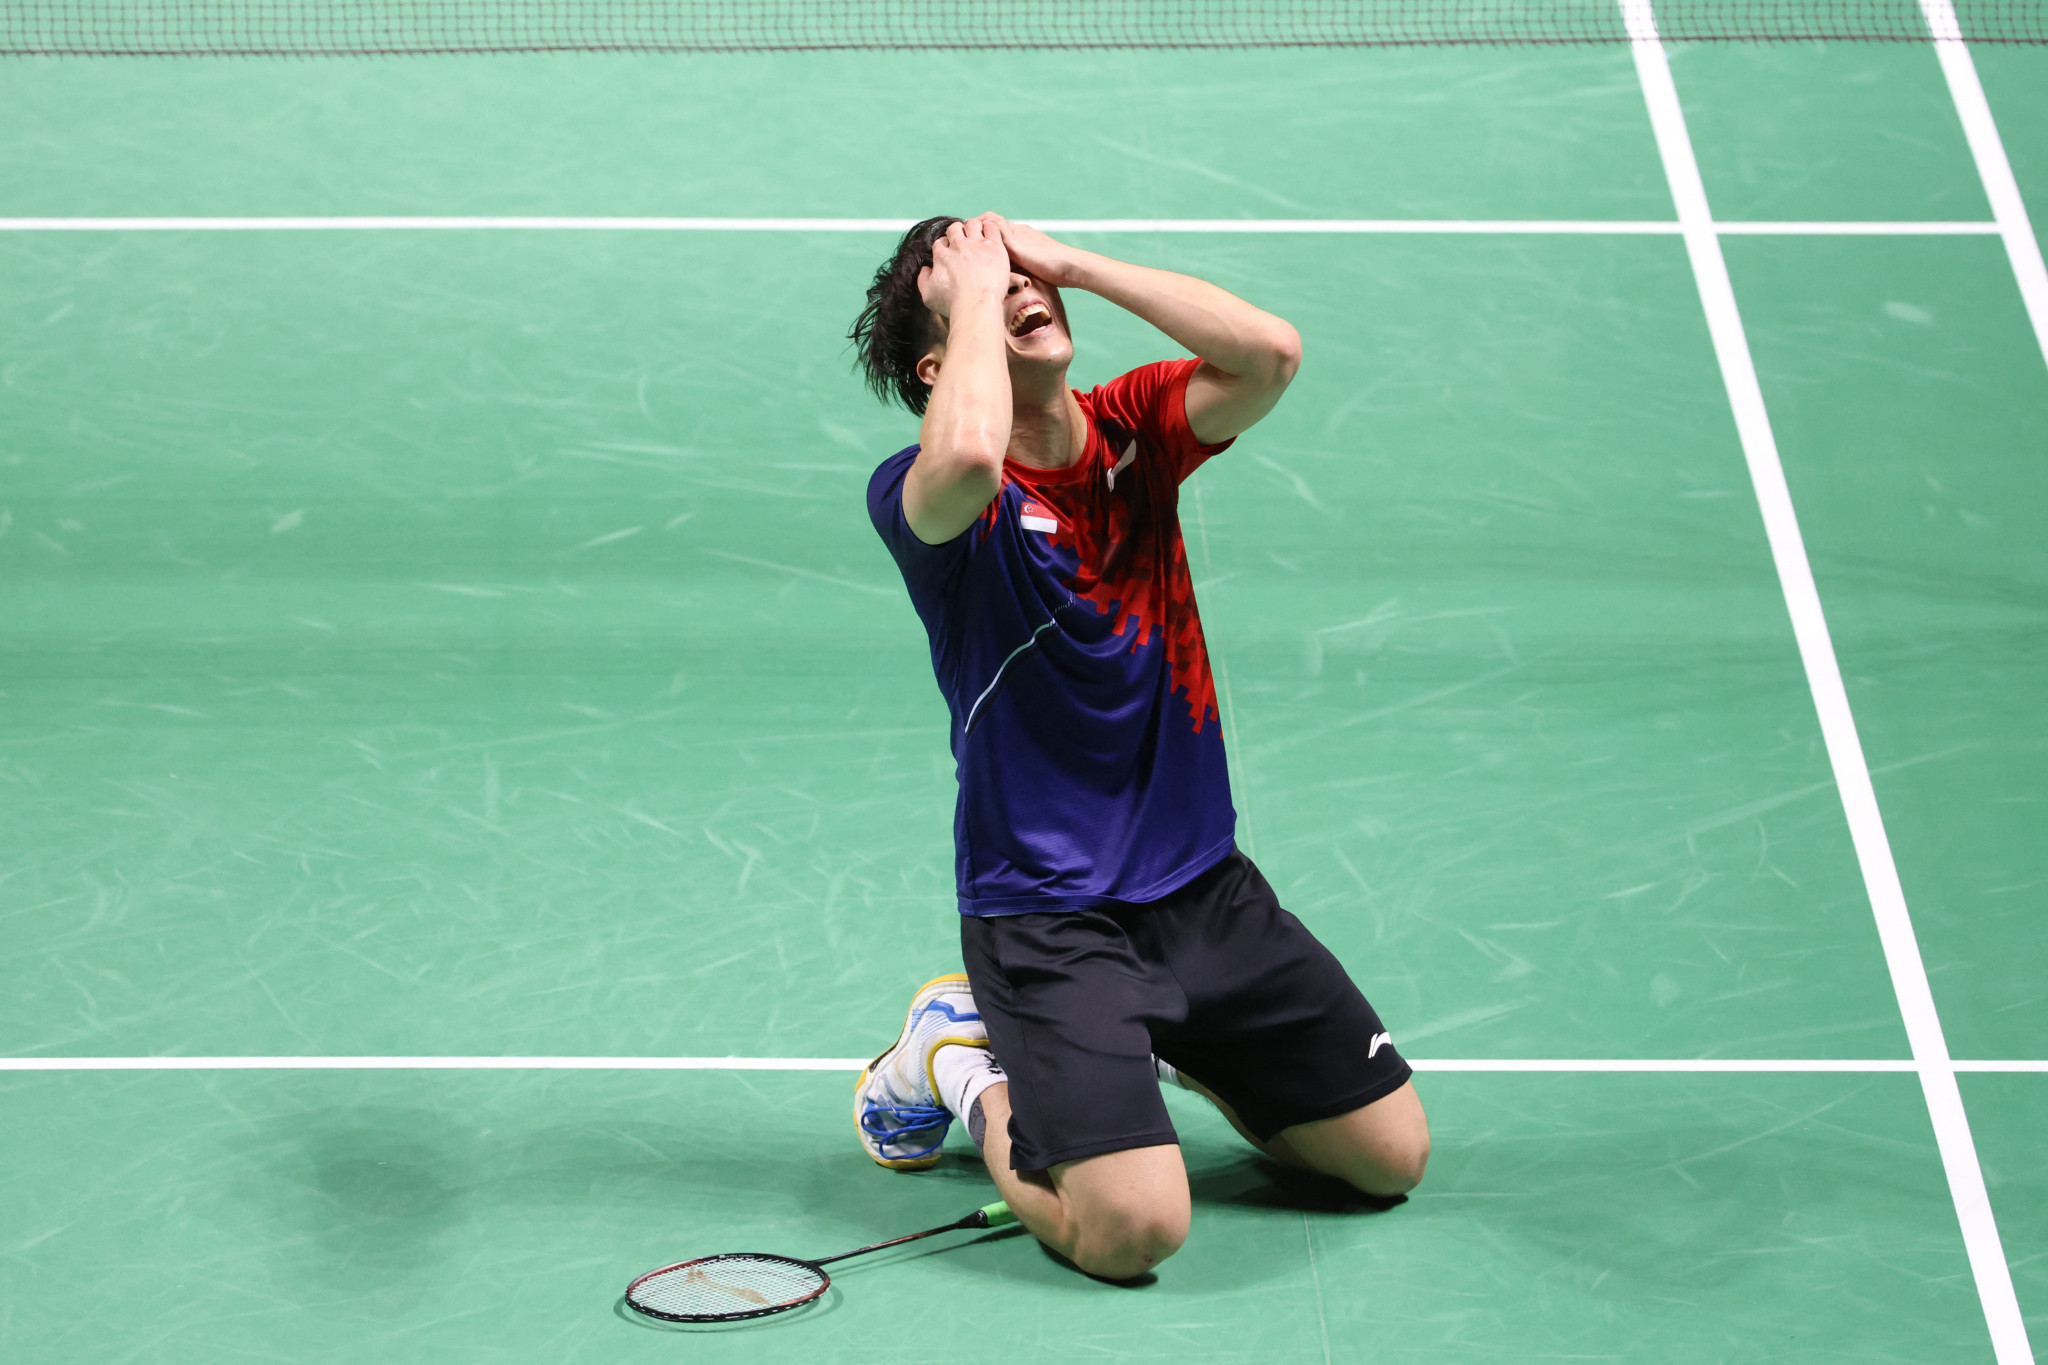 Loh becomes first Singapore player to win Badminton World Championships title